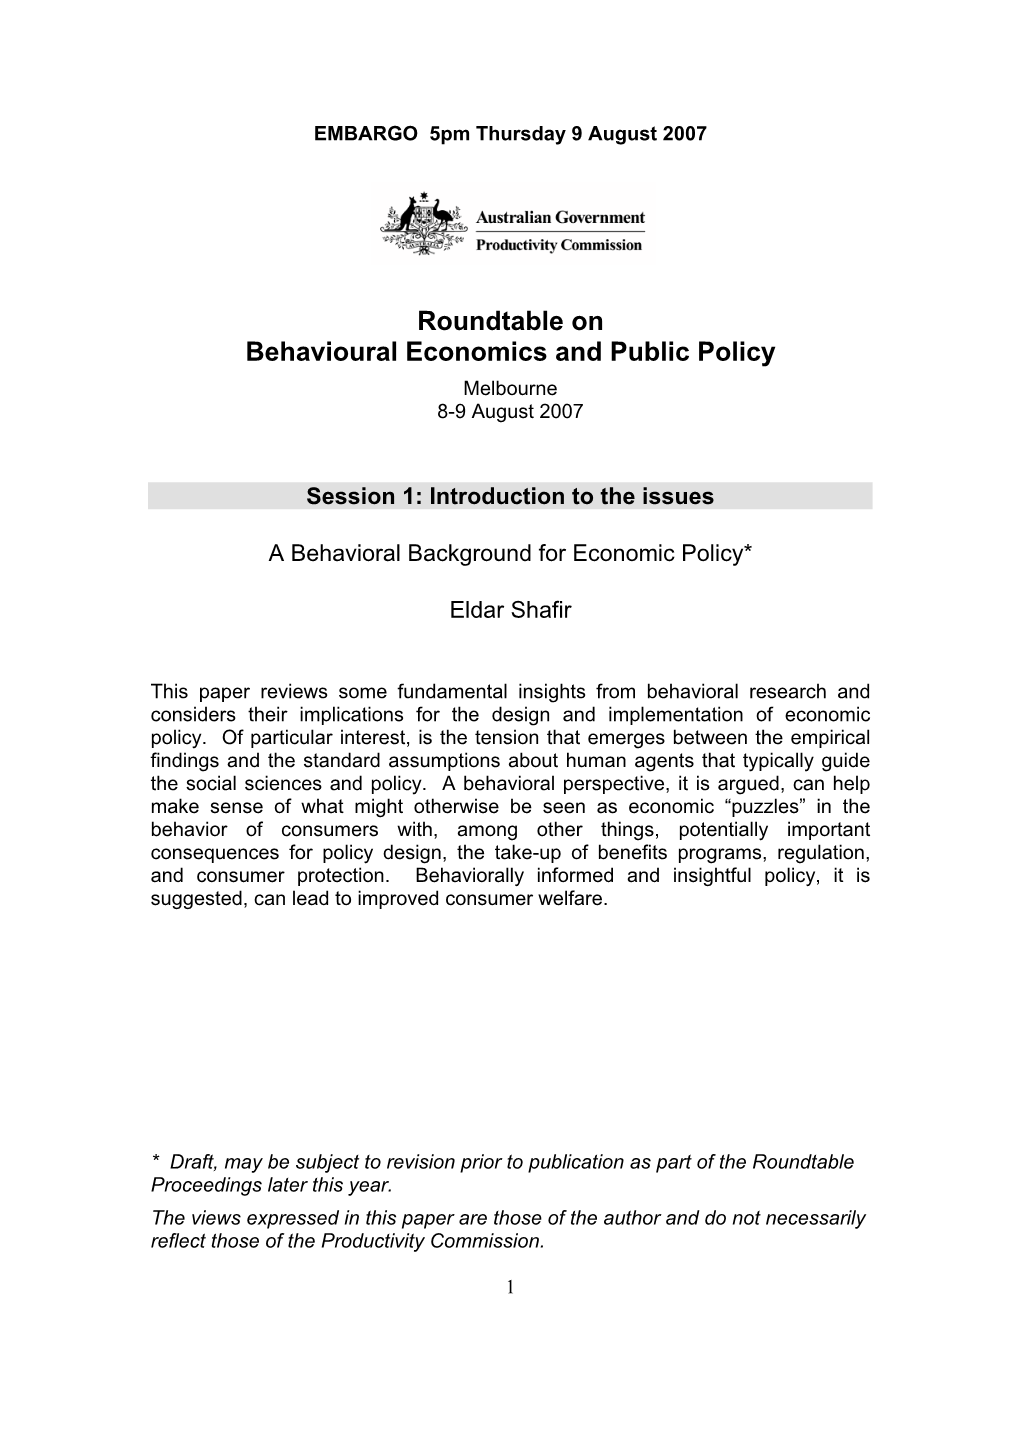 Roundtable on Behavioural Economics and Public Policy Melbourne 8-9 August 2007